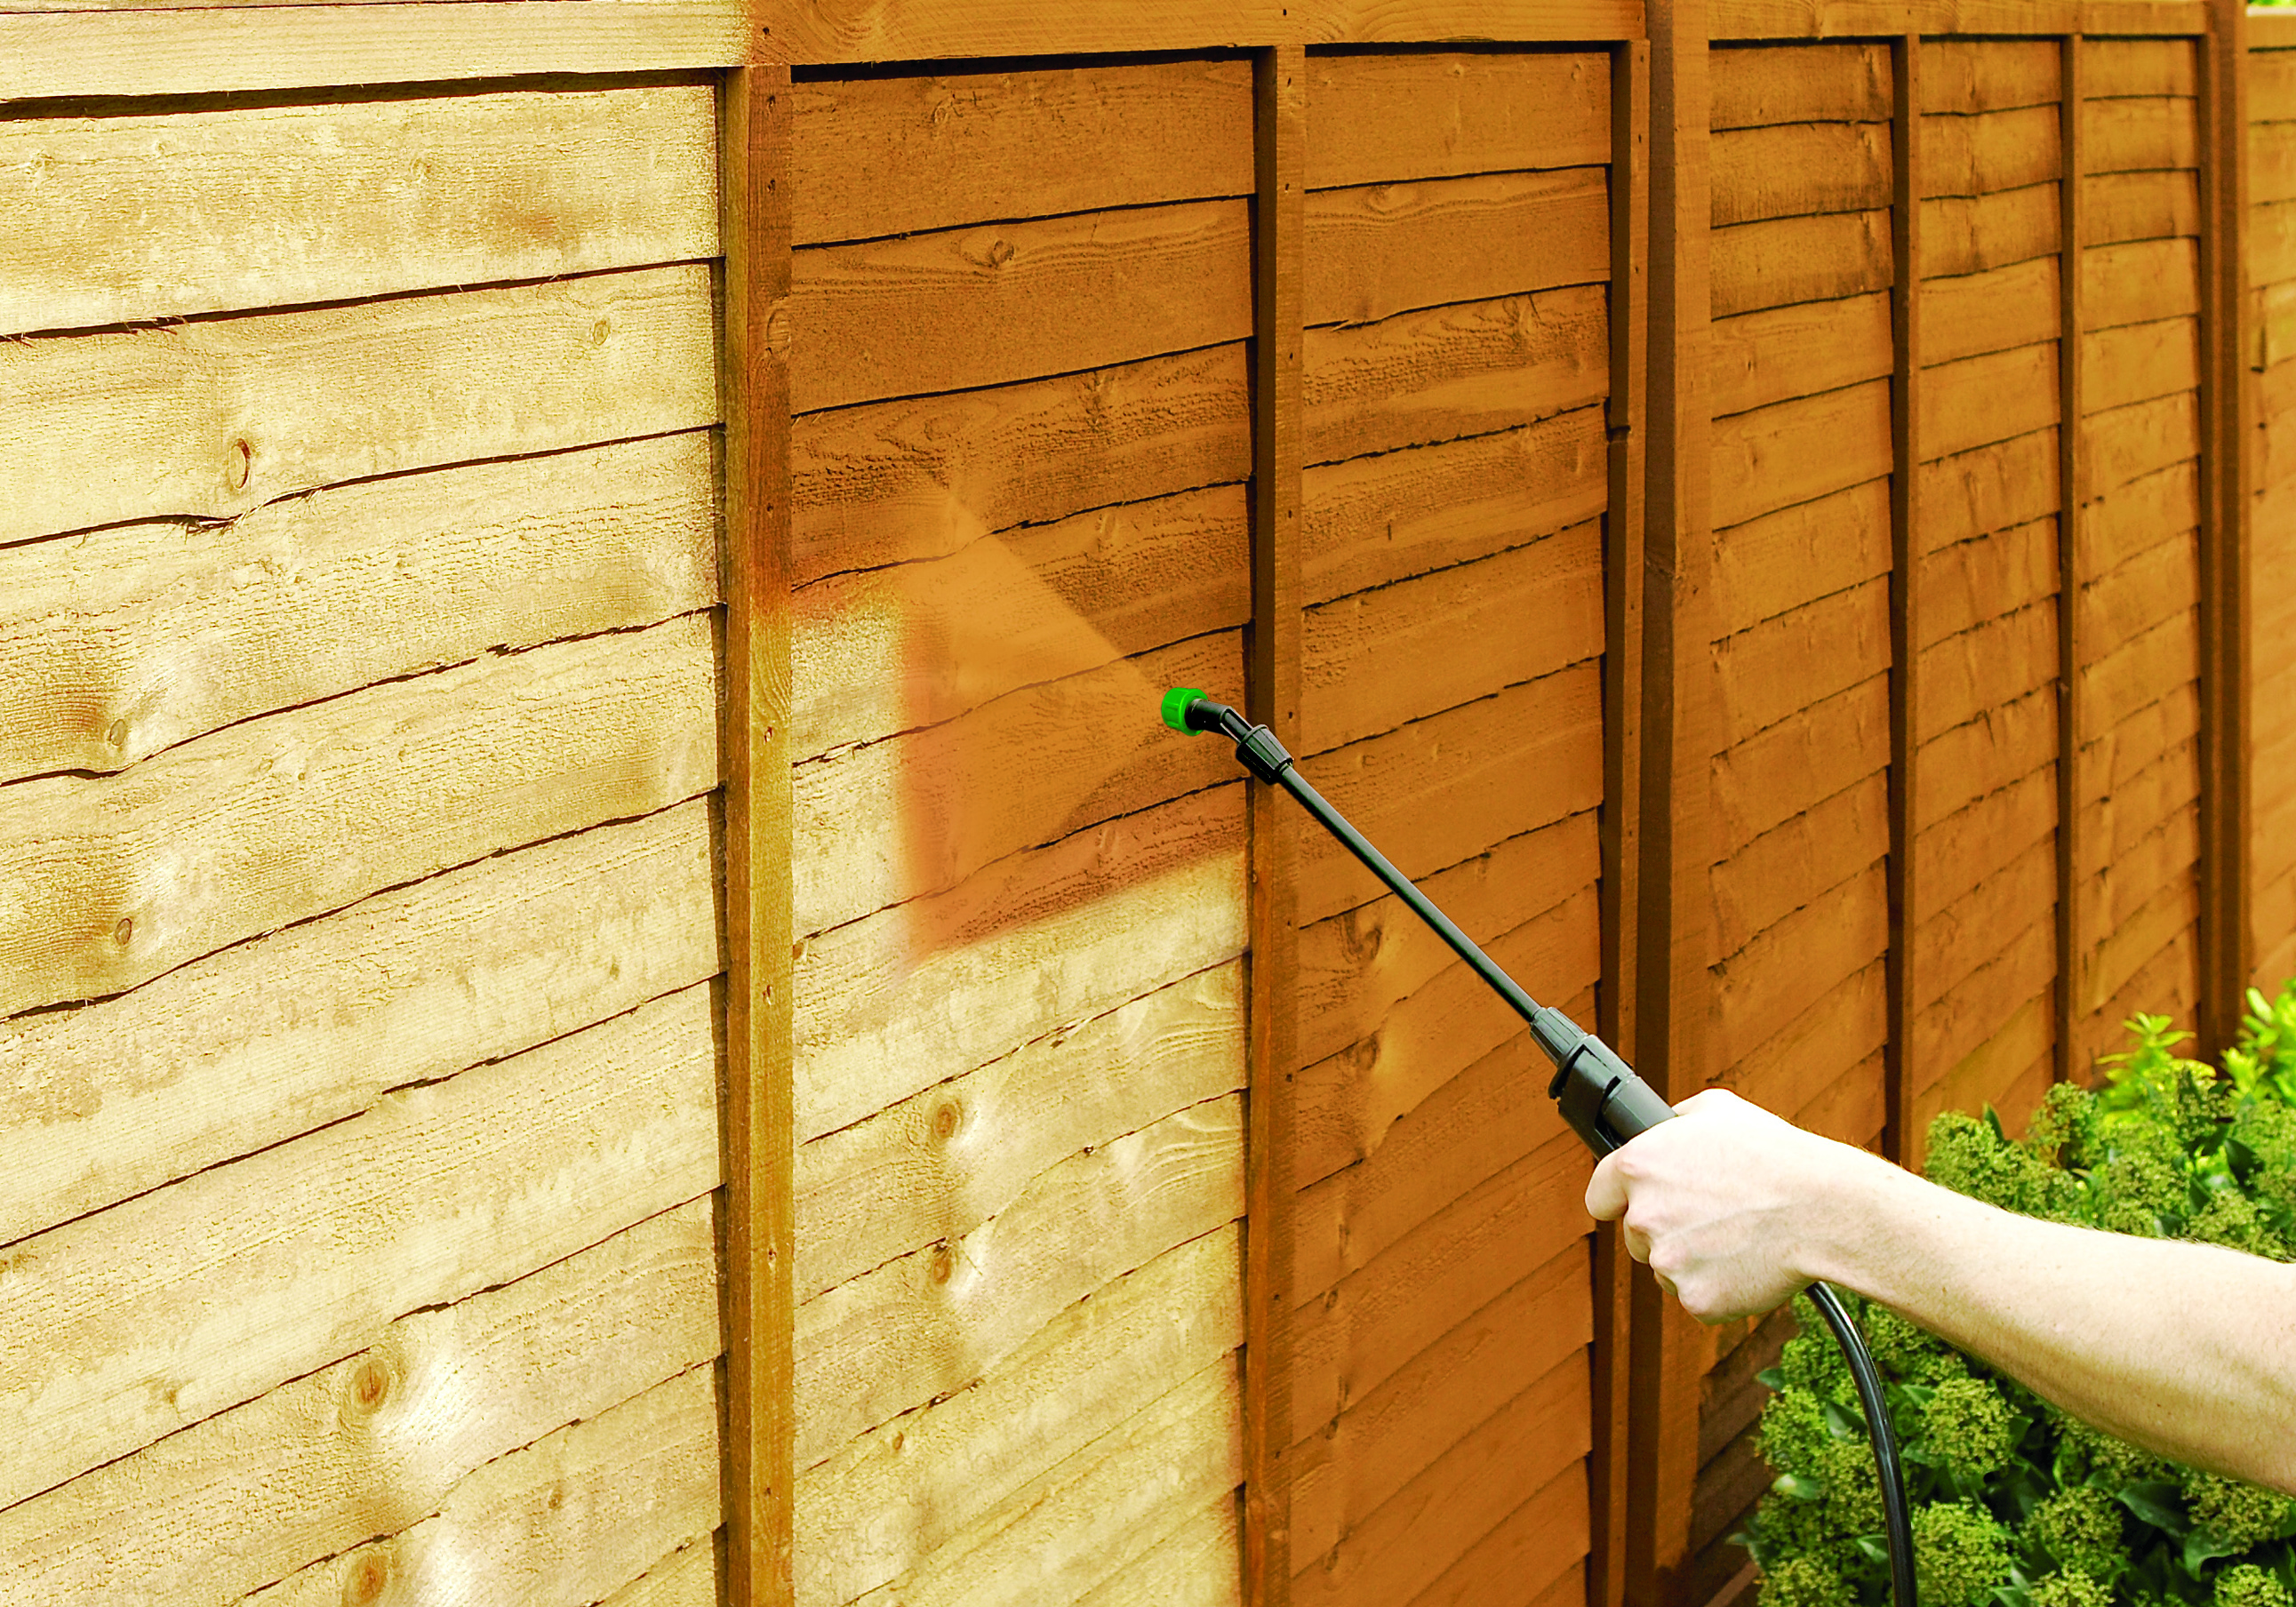 PRESSURE SPRAYER GARDEN TIMBER FENCE SHED WOOD PAINT 5L SPRAYABLE TIMBERCARE 